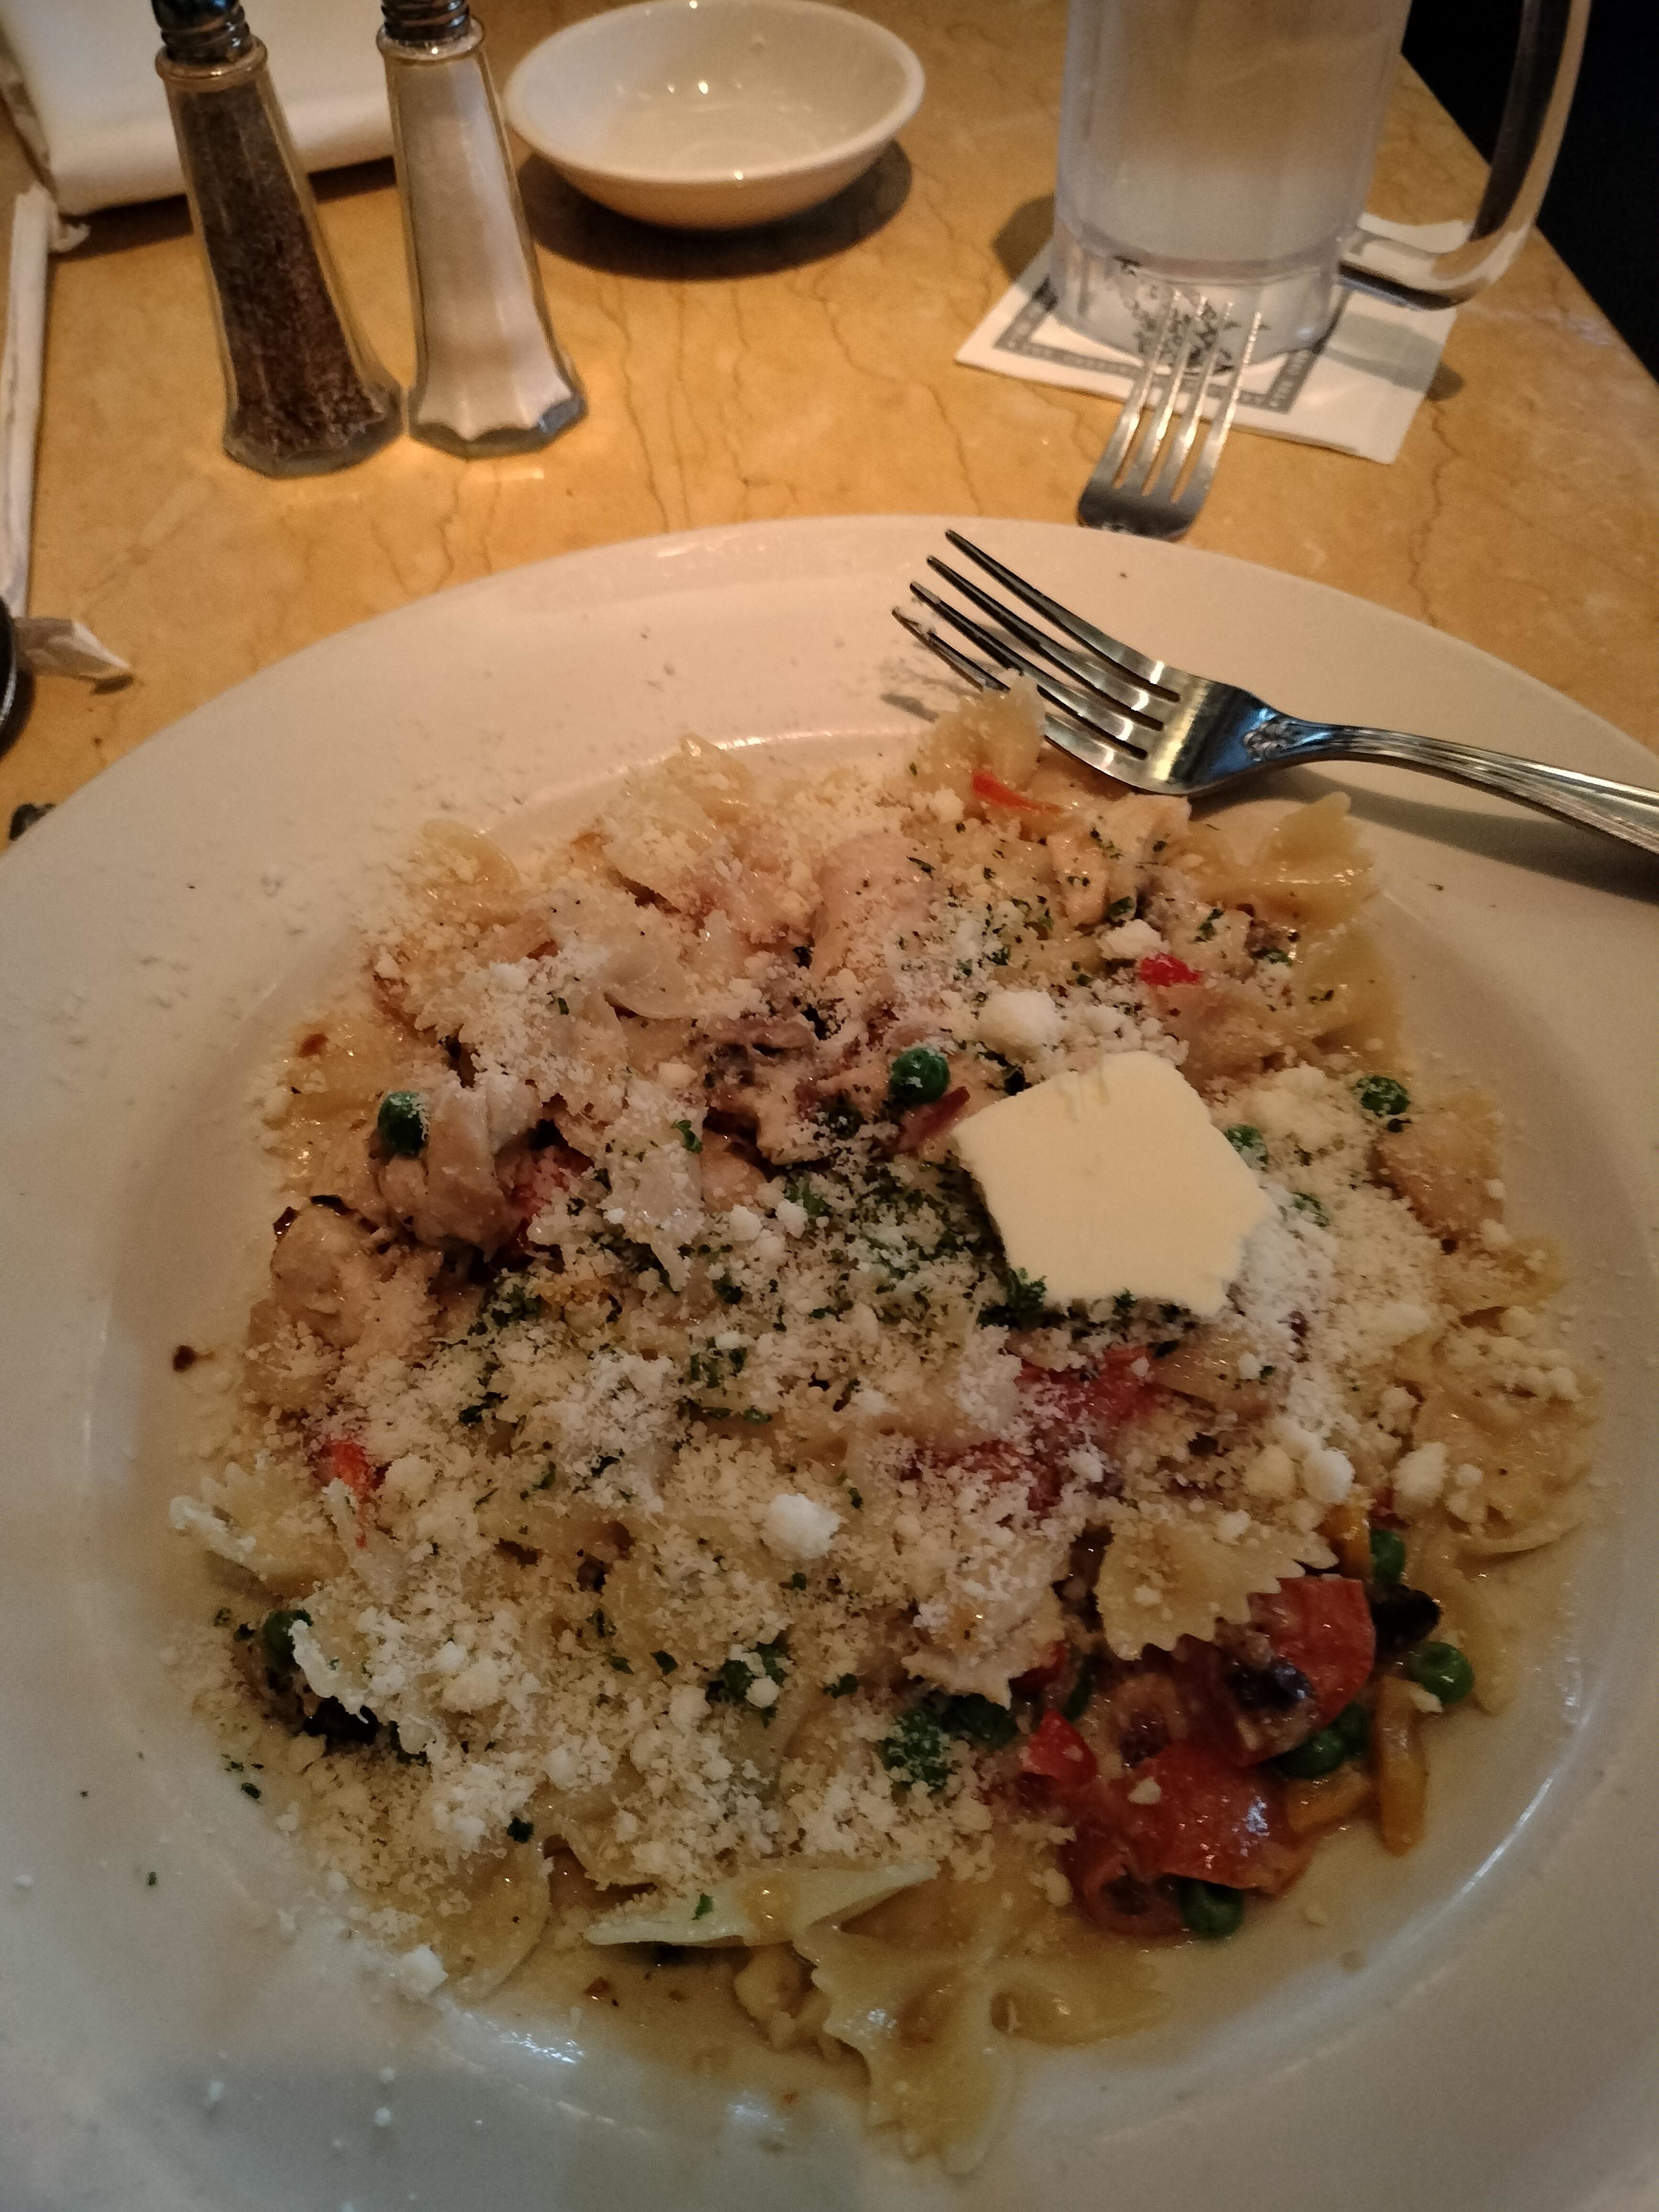 A plate of pasta with chicken, vegetables, and a slice of butter, topped with grated cheese, on a table with salt and pepper shakers